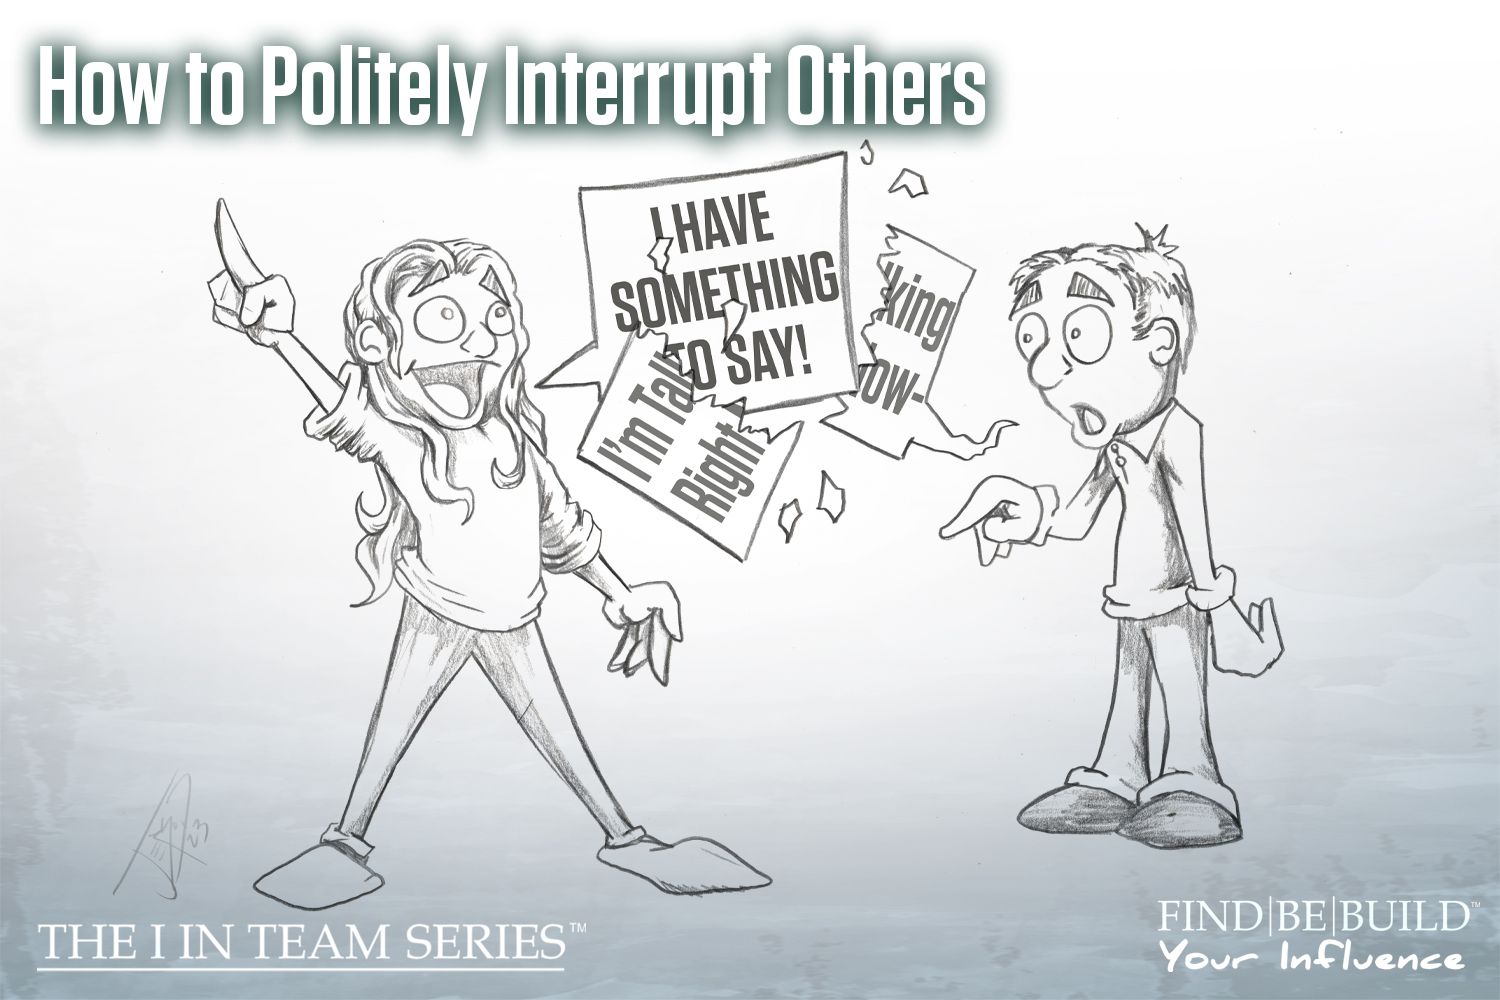 How to Politely Interrupt Others